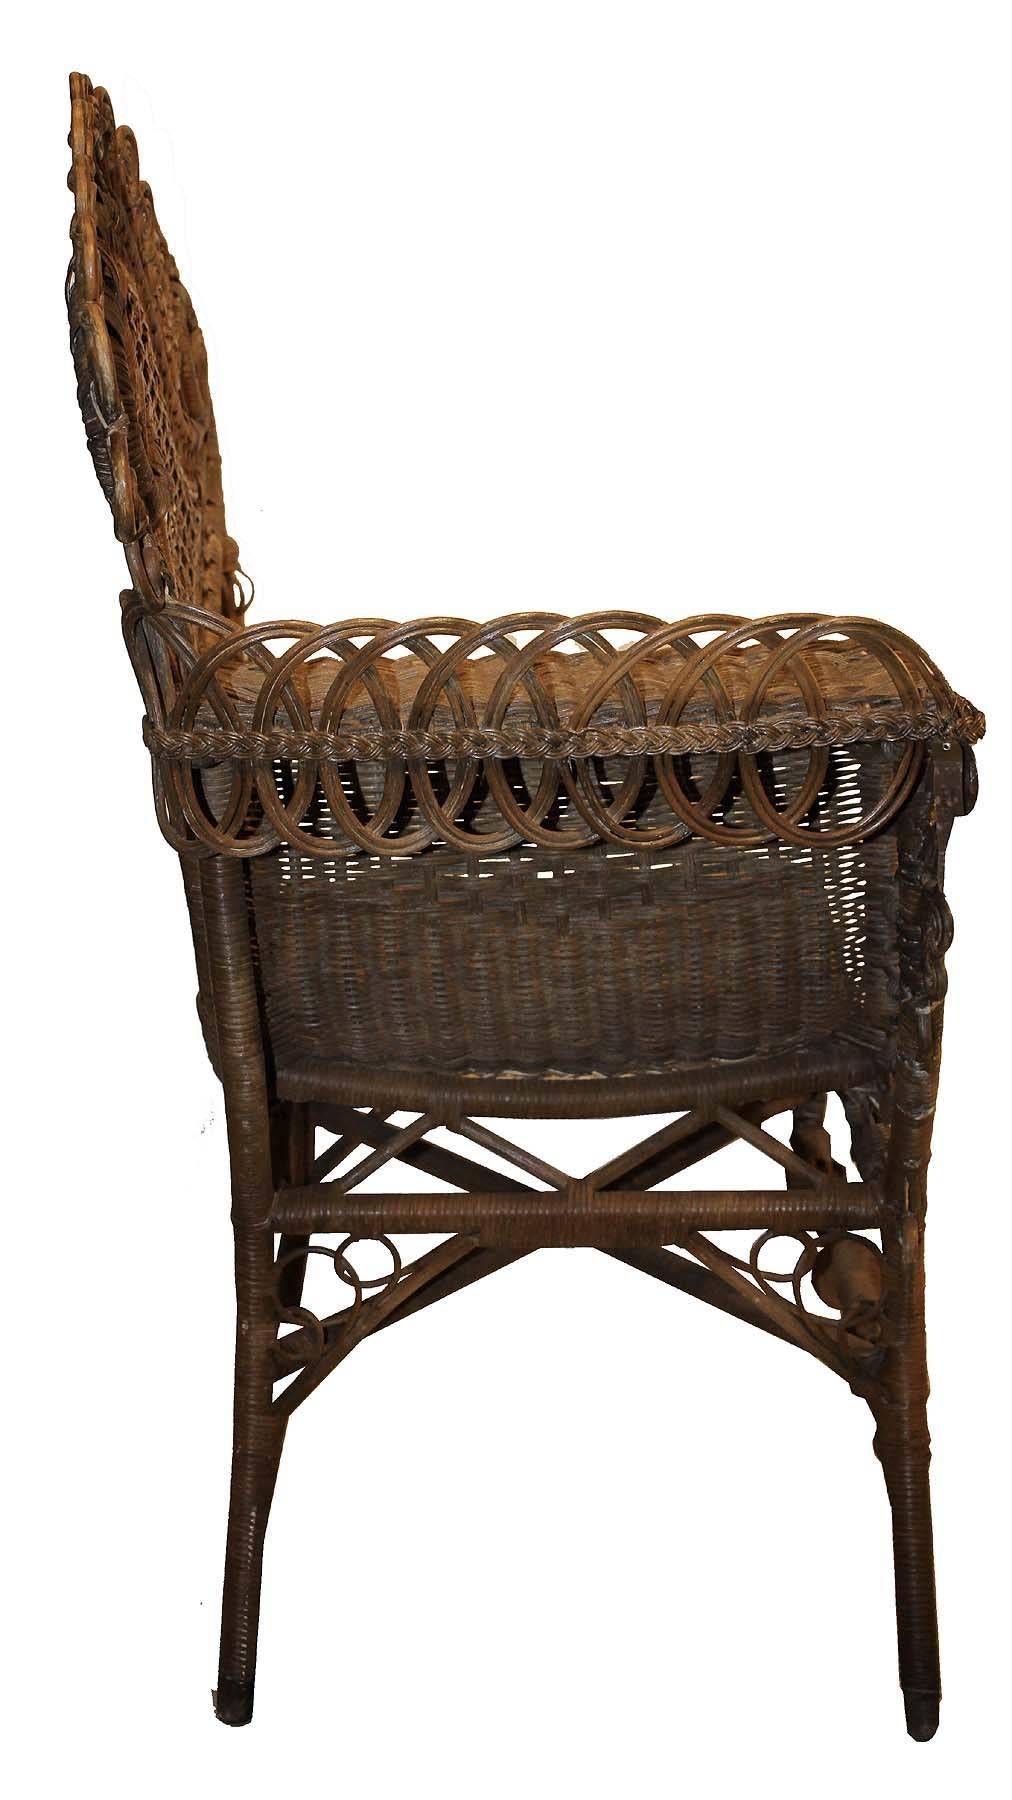 This chair was made to be used in a photo studio to have your picture done in the 19th century. Made of Wicker and cane it was created by the Heywood and Wakefield co. The details are amazing. Cane work flawless. It has a few condition issues that